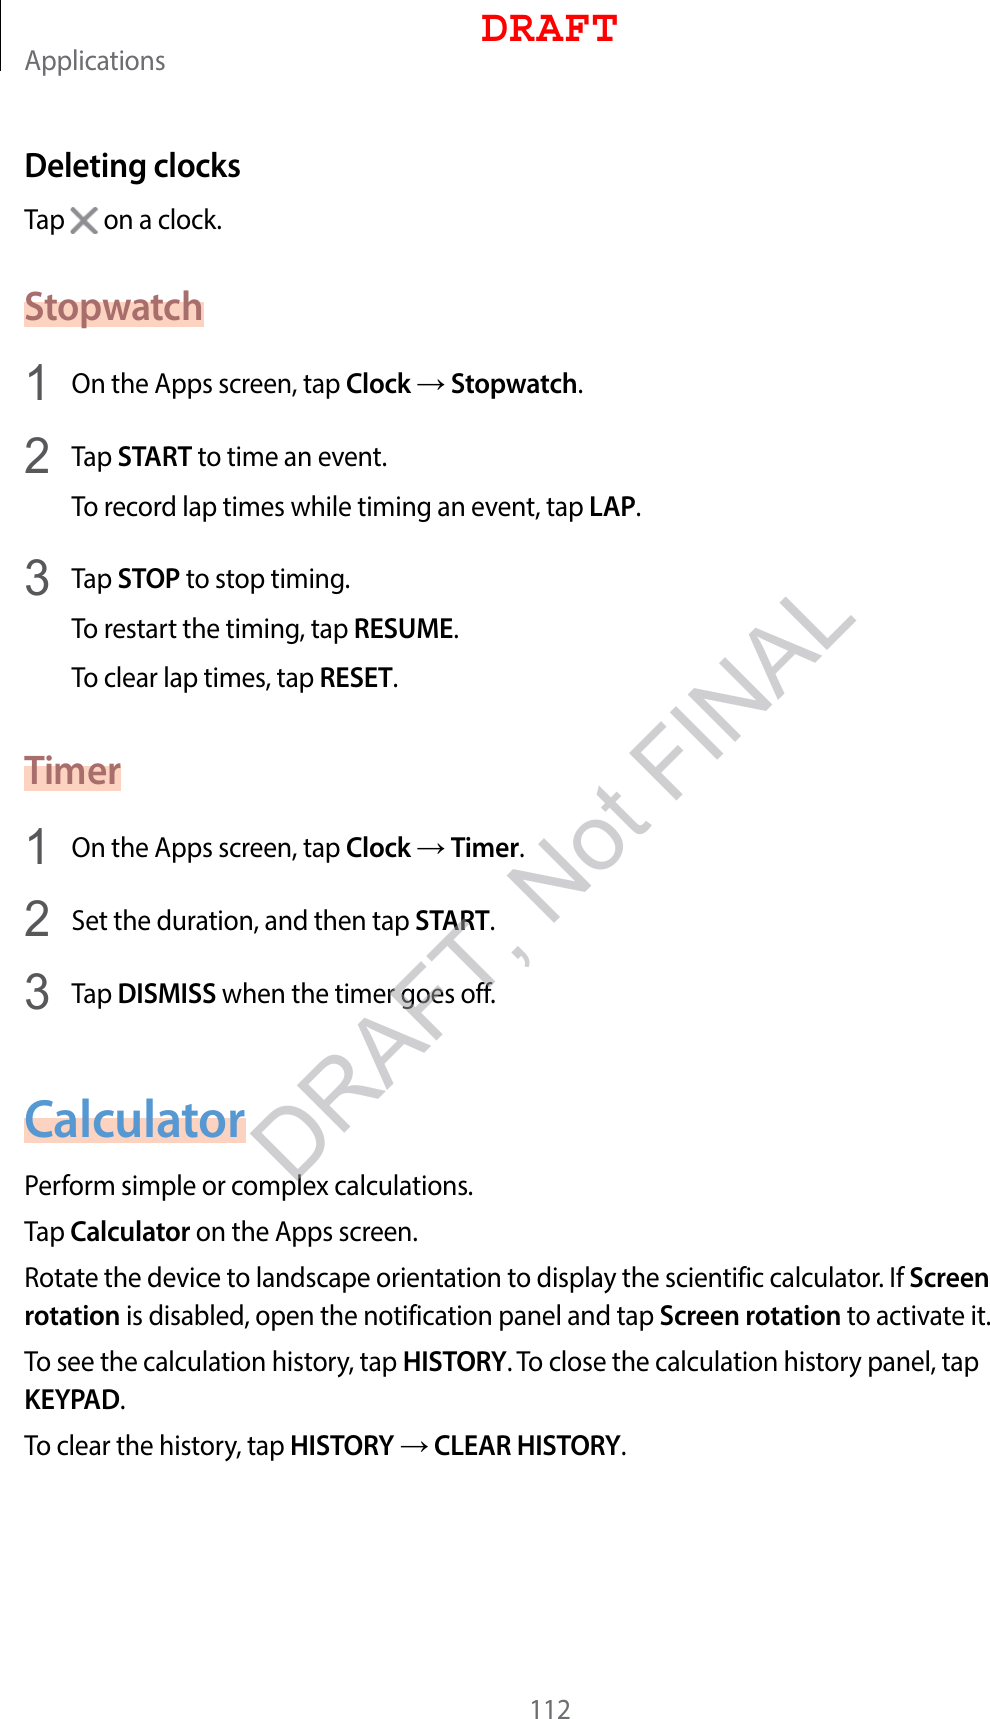 Applications112Deleting clocksTap   on a clock.Stopwatch1  On the Apps screen, tap Clock  Stopwatch.2  Tap START to time an event.To record lap times while timing an event, tap LAP.3  Tap STOP to stop timing.To restart the timing, tap RESUME.To clear lap times, tap RESET.Timer1  On the Apps screen, tap Clock  Timer.2  Set the duration, and then tap START.3  Tap DISMISS when the timer goes off.CalculatorPerform simple or complex calculations.Tap Calculator on the Apps screen.Rotate the device to landscape orientation to display the scientific calculator. If Screen rotation is disabled, open the notification panel and tap Screen rotation to activate it.To see the calculation history, tap HISTORY. To close the calculation history panel, tap KEYPAD.To clear the history, tap HISTORY  CLEAR HISTORY.DRAFTDRAFT, Not FINAL